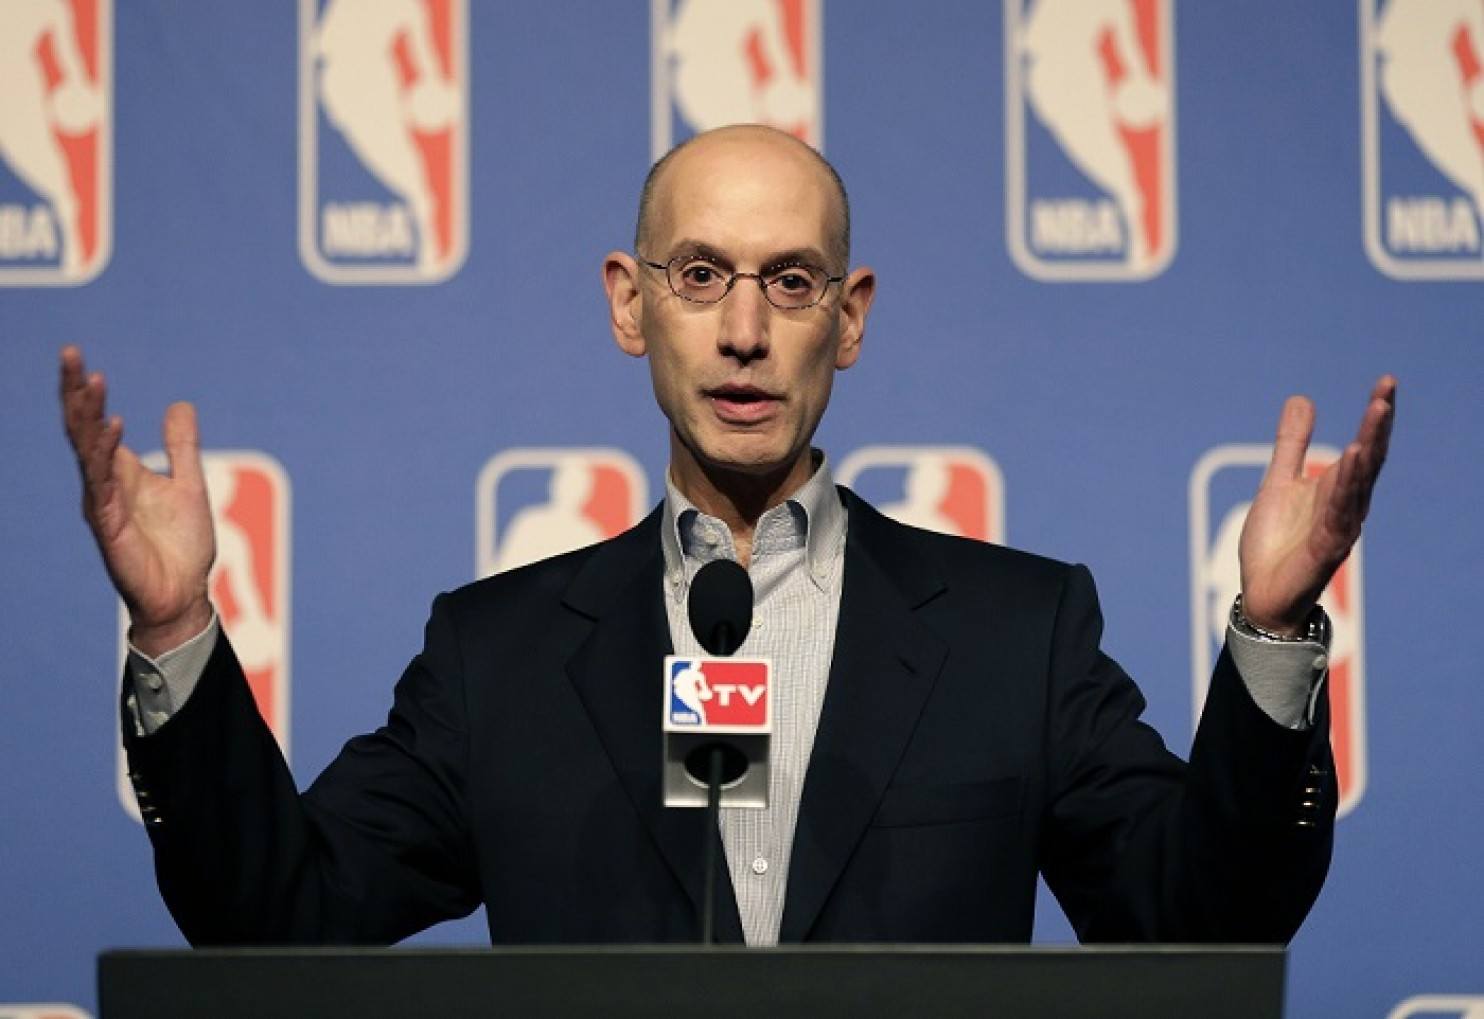 Adam Silver opens up on NBA conspiracy theories and errors | Movie TV Tech Geeks News1484 x 1019